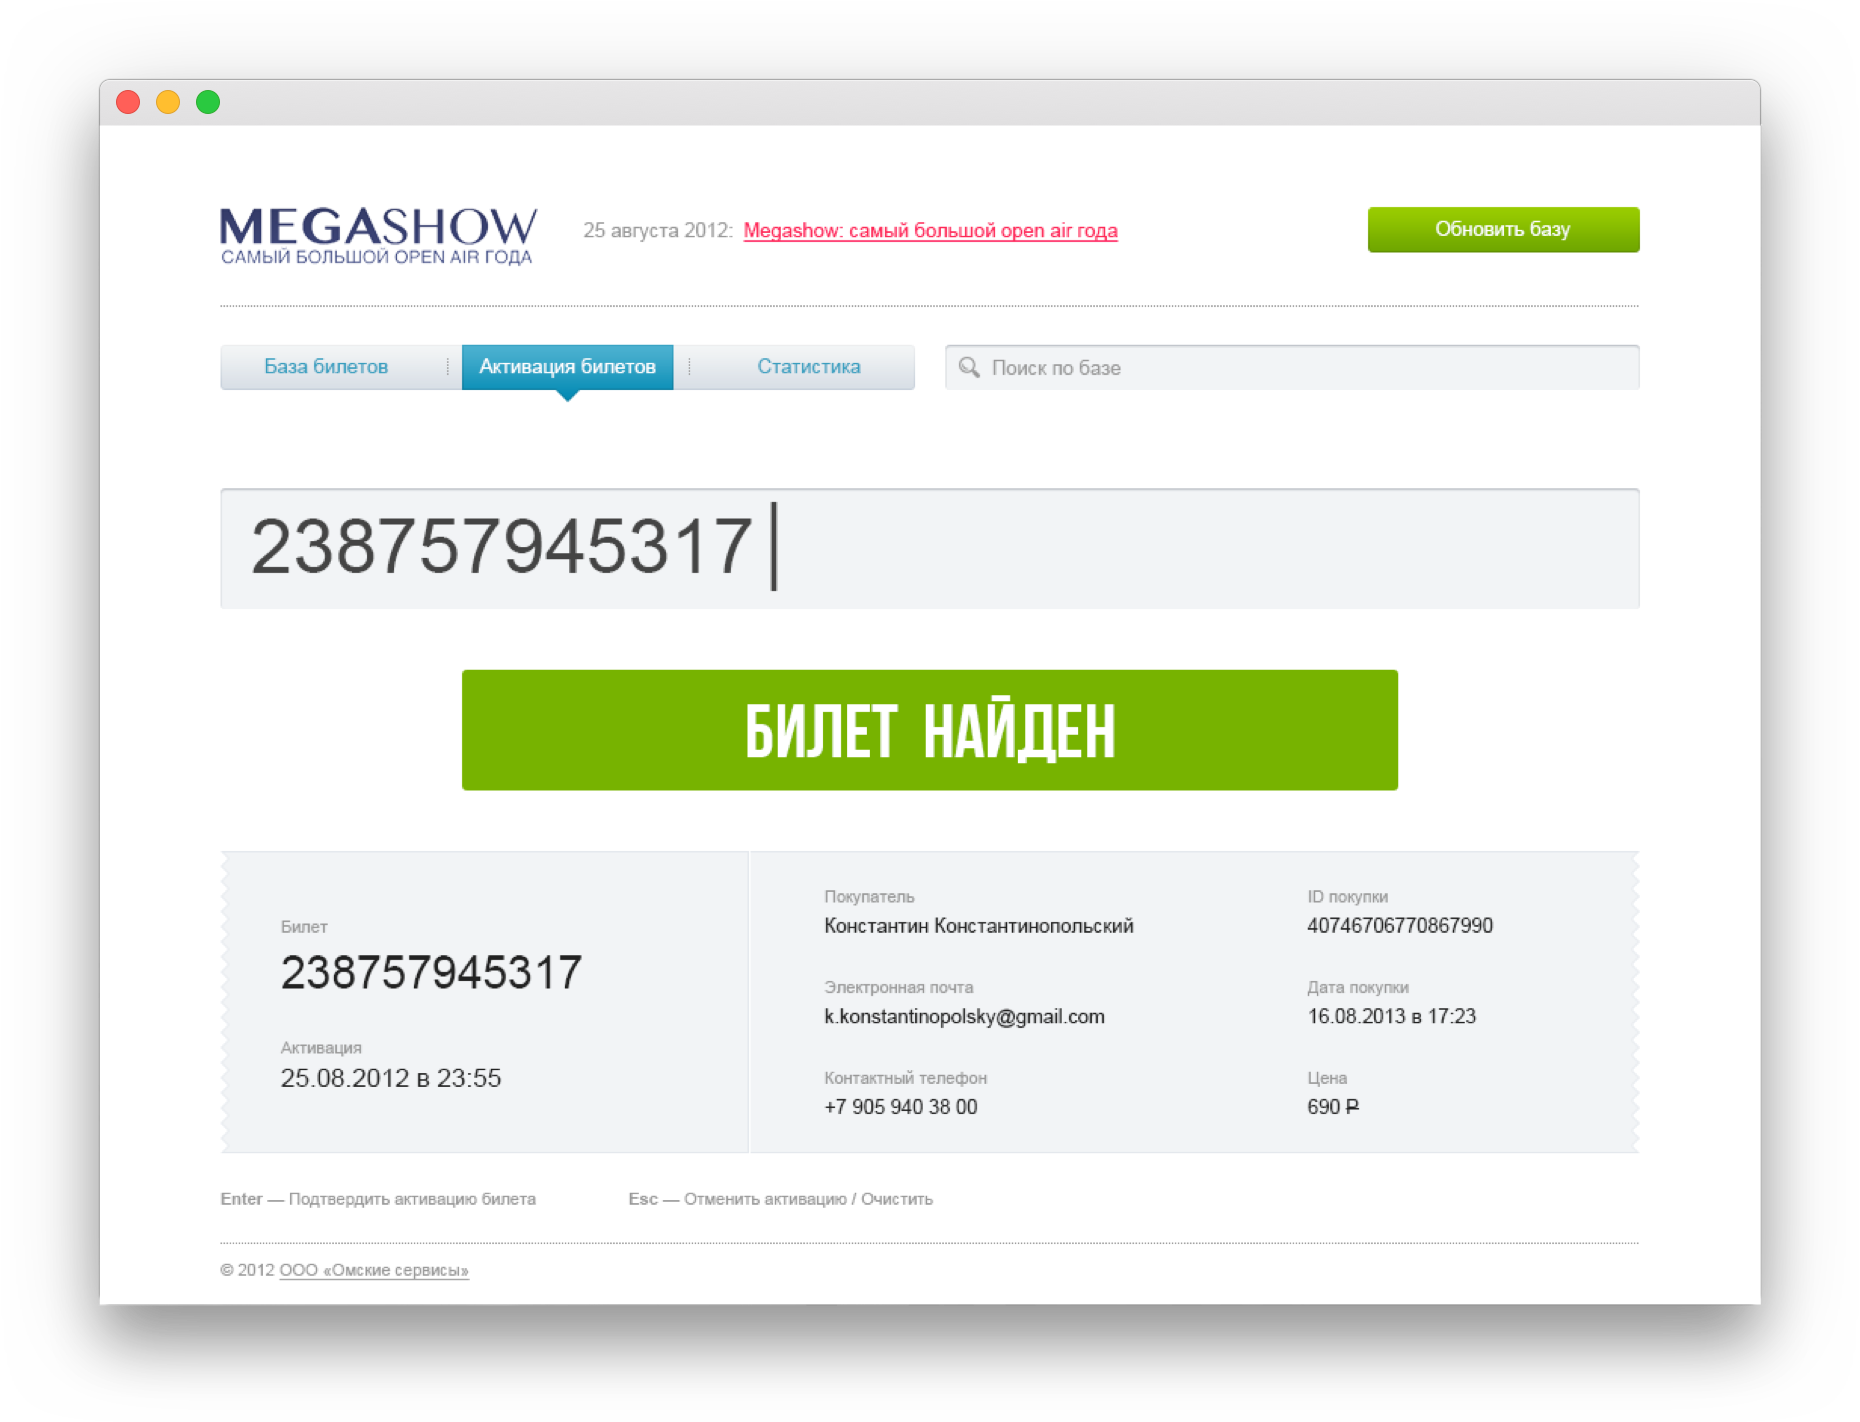 Megashow ticket interface the most expensive and extensive event in the history of Omsk 25 august 2012 Oleg Borisov Omsk Moscow Russia